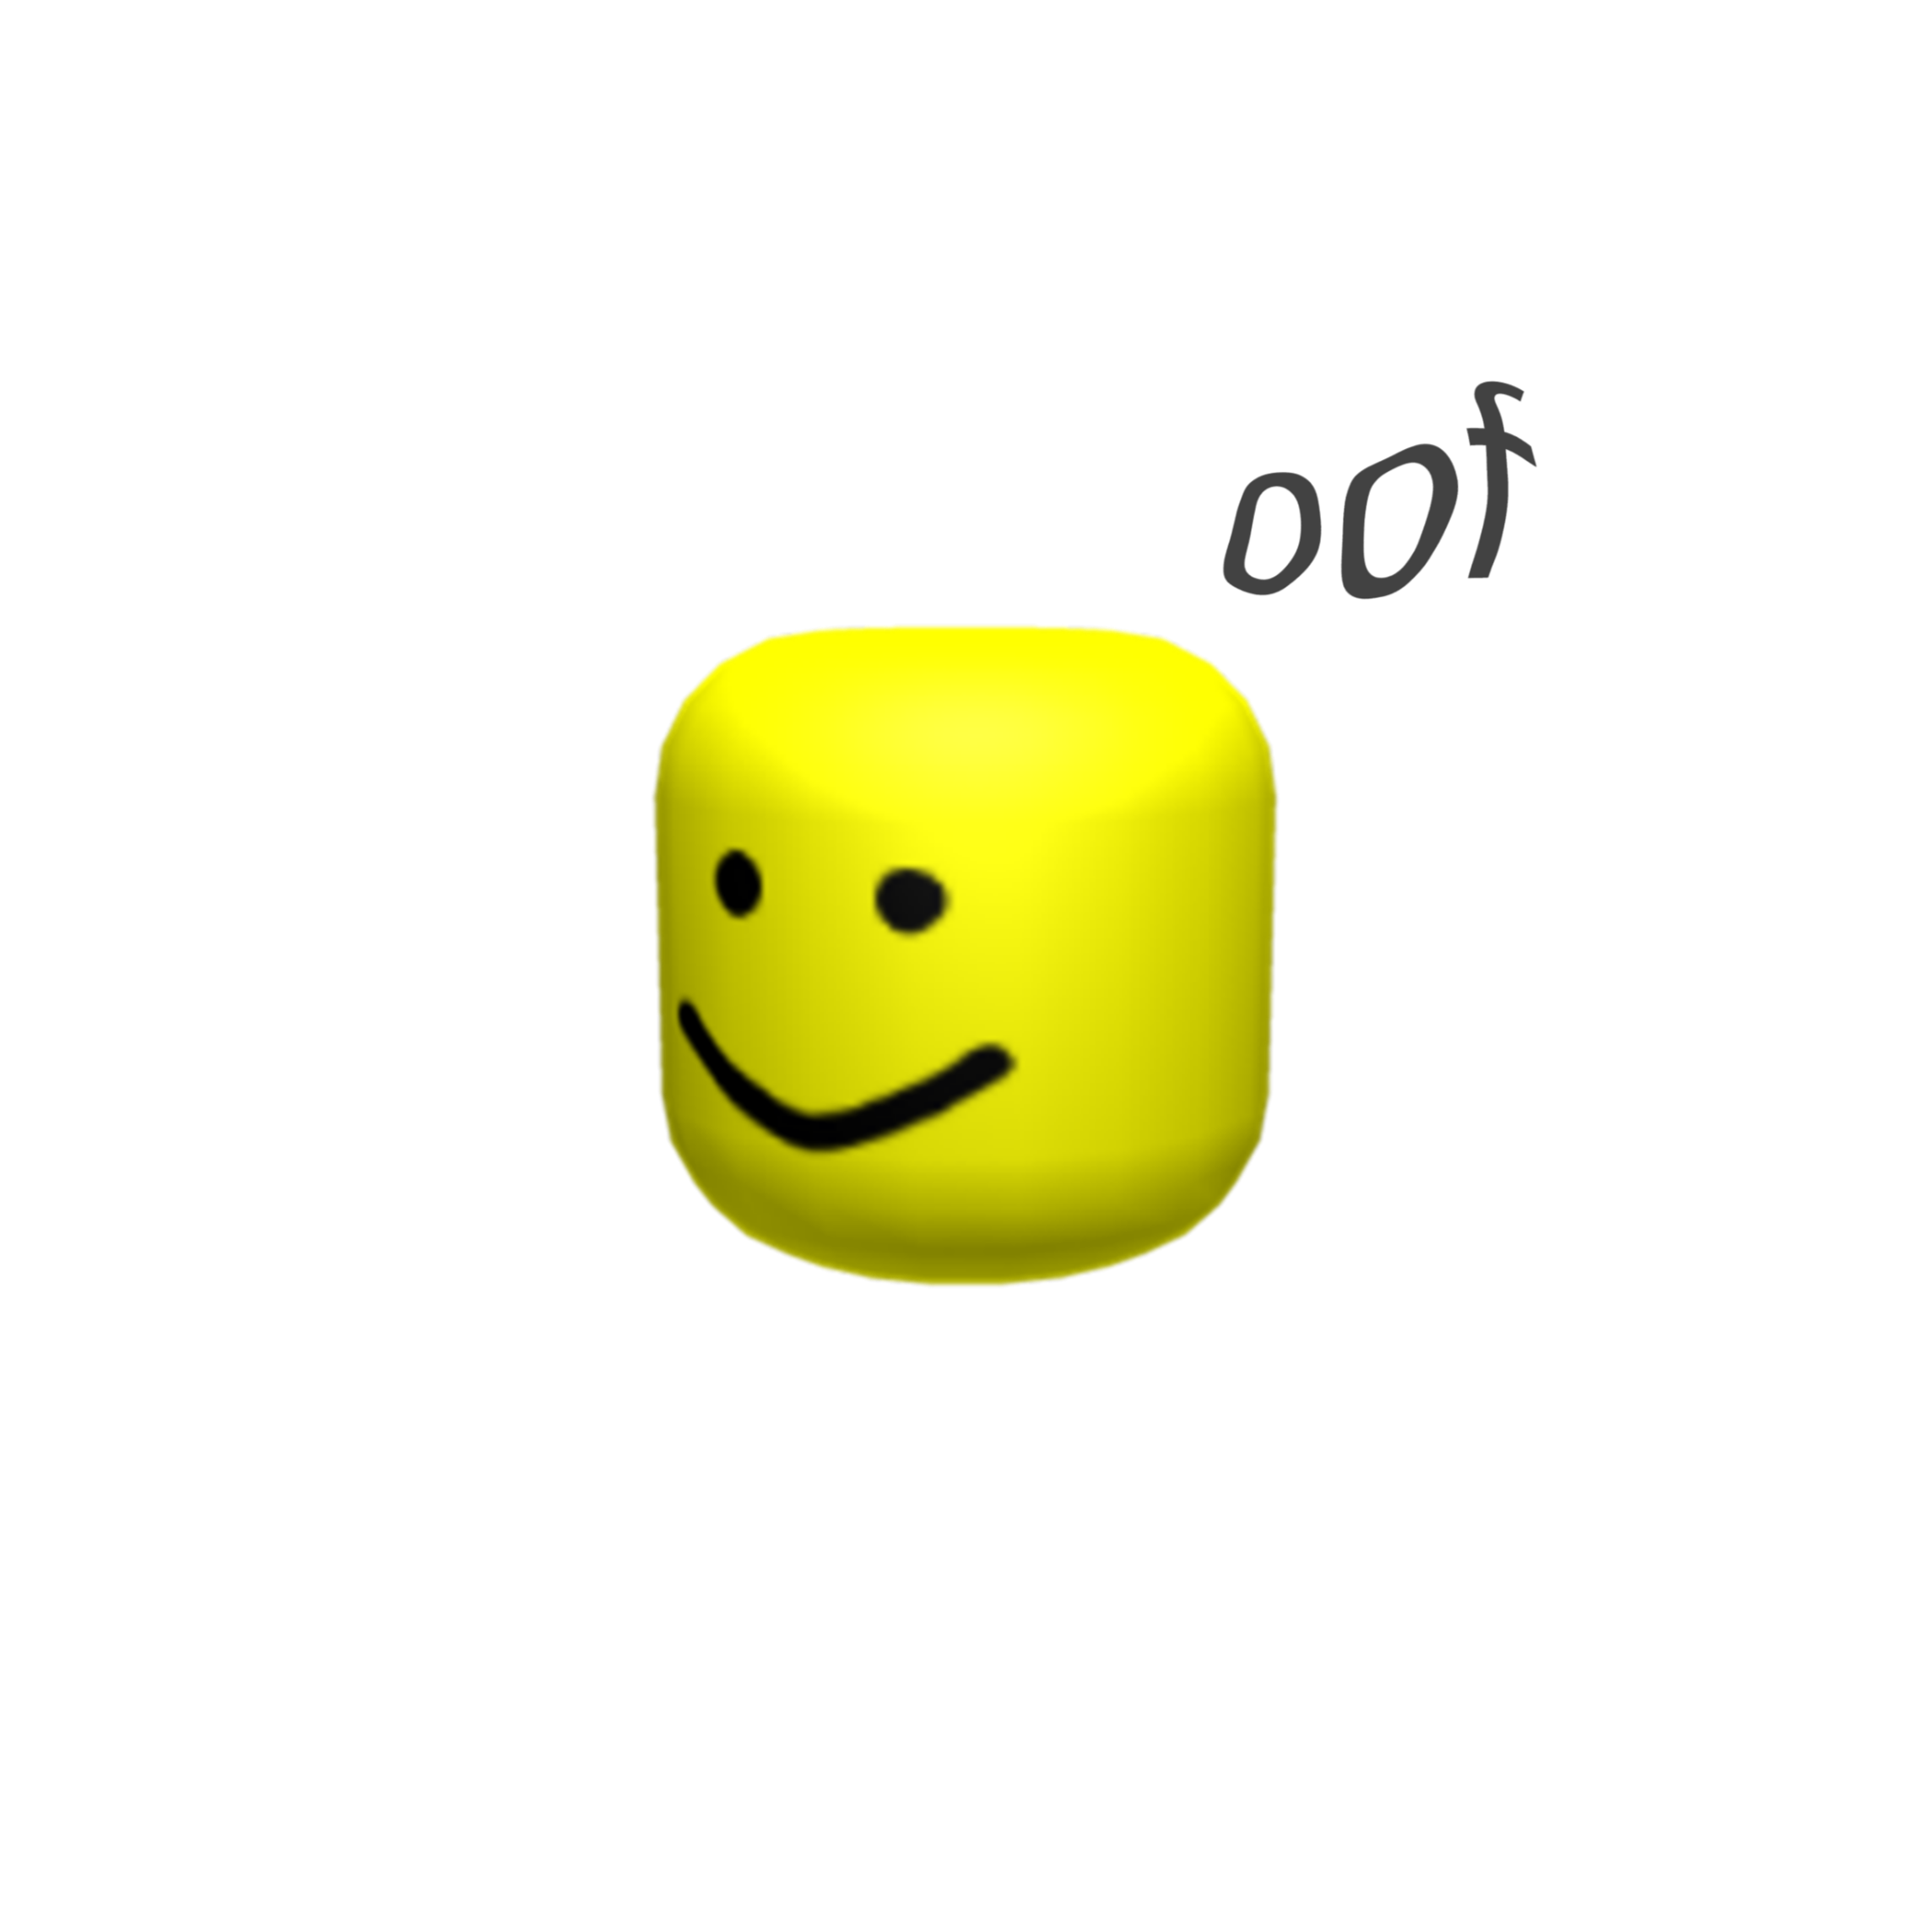 This visual is about meme roblox oof robloxmeme freetoedit #meme #roblox #o...